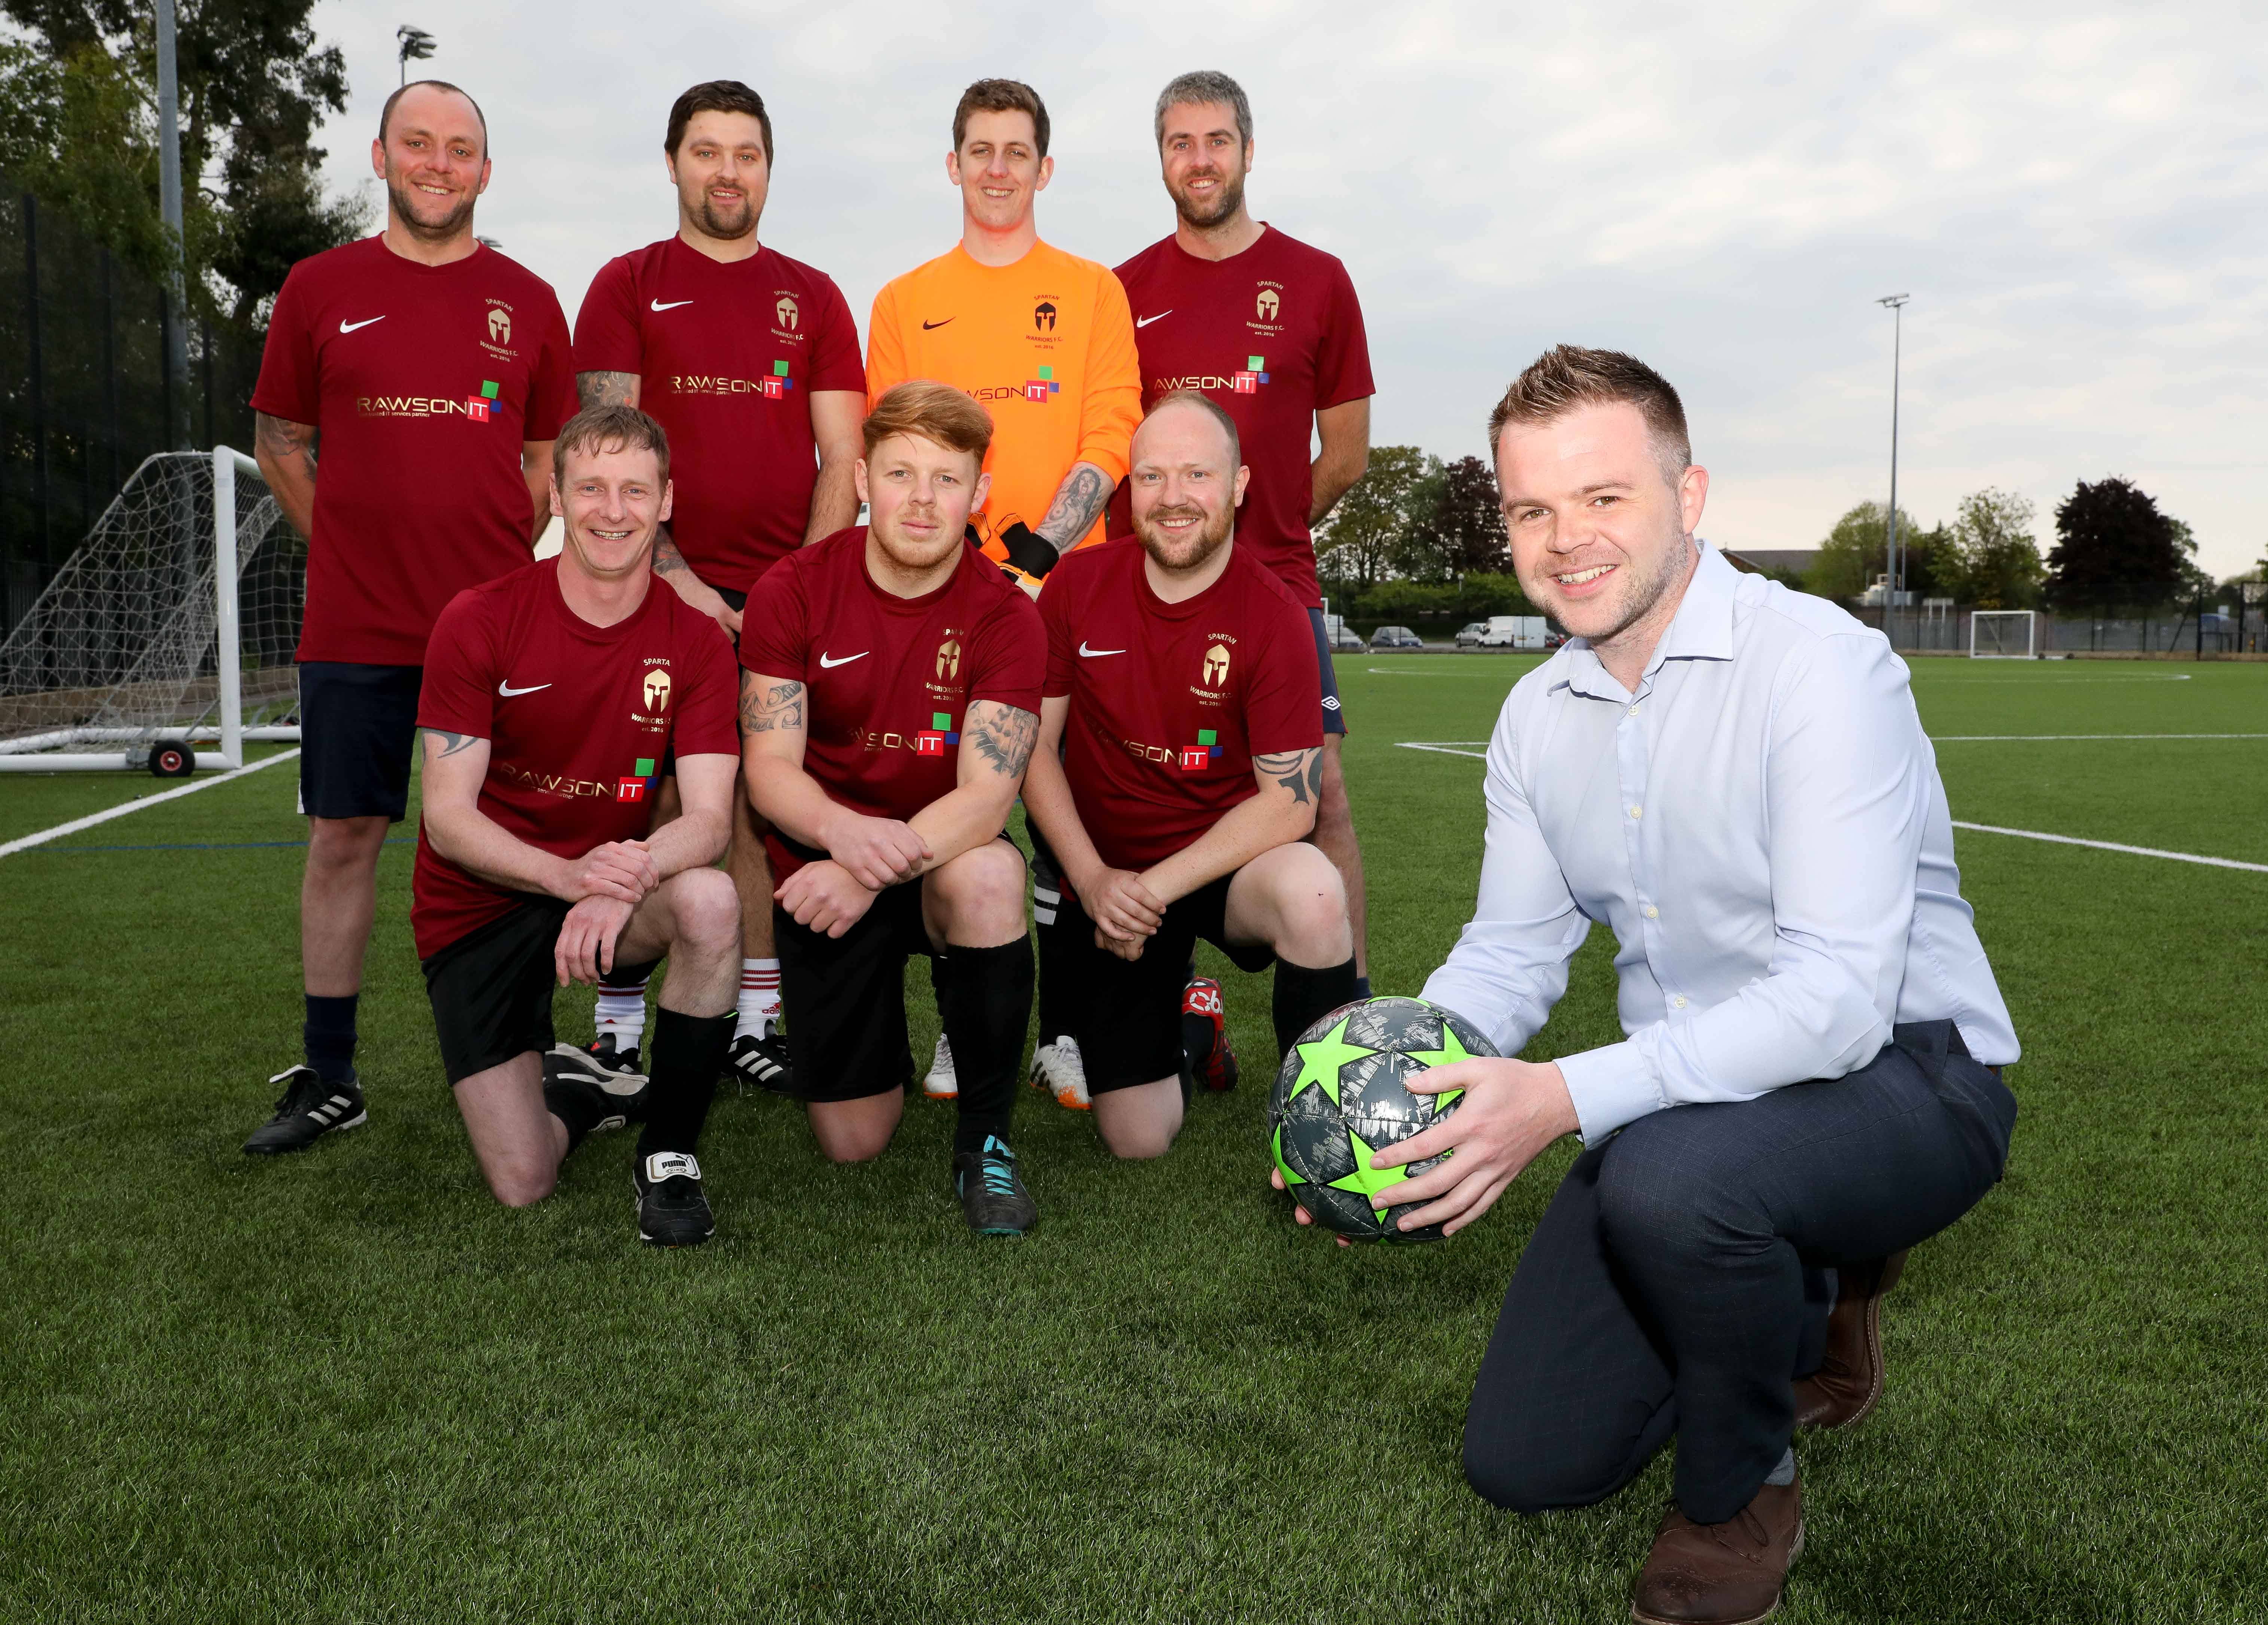 New strip for football dads chasing title win thanks to Wrexham IT firm